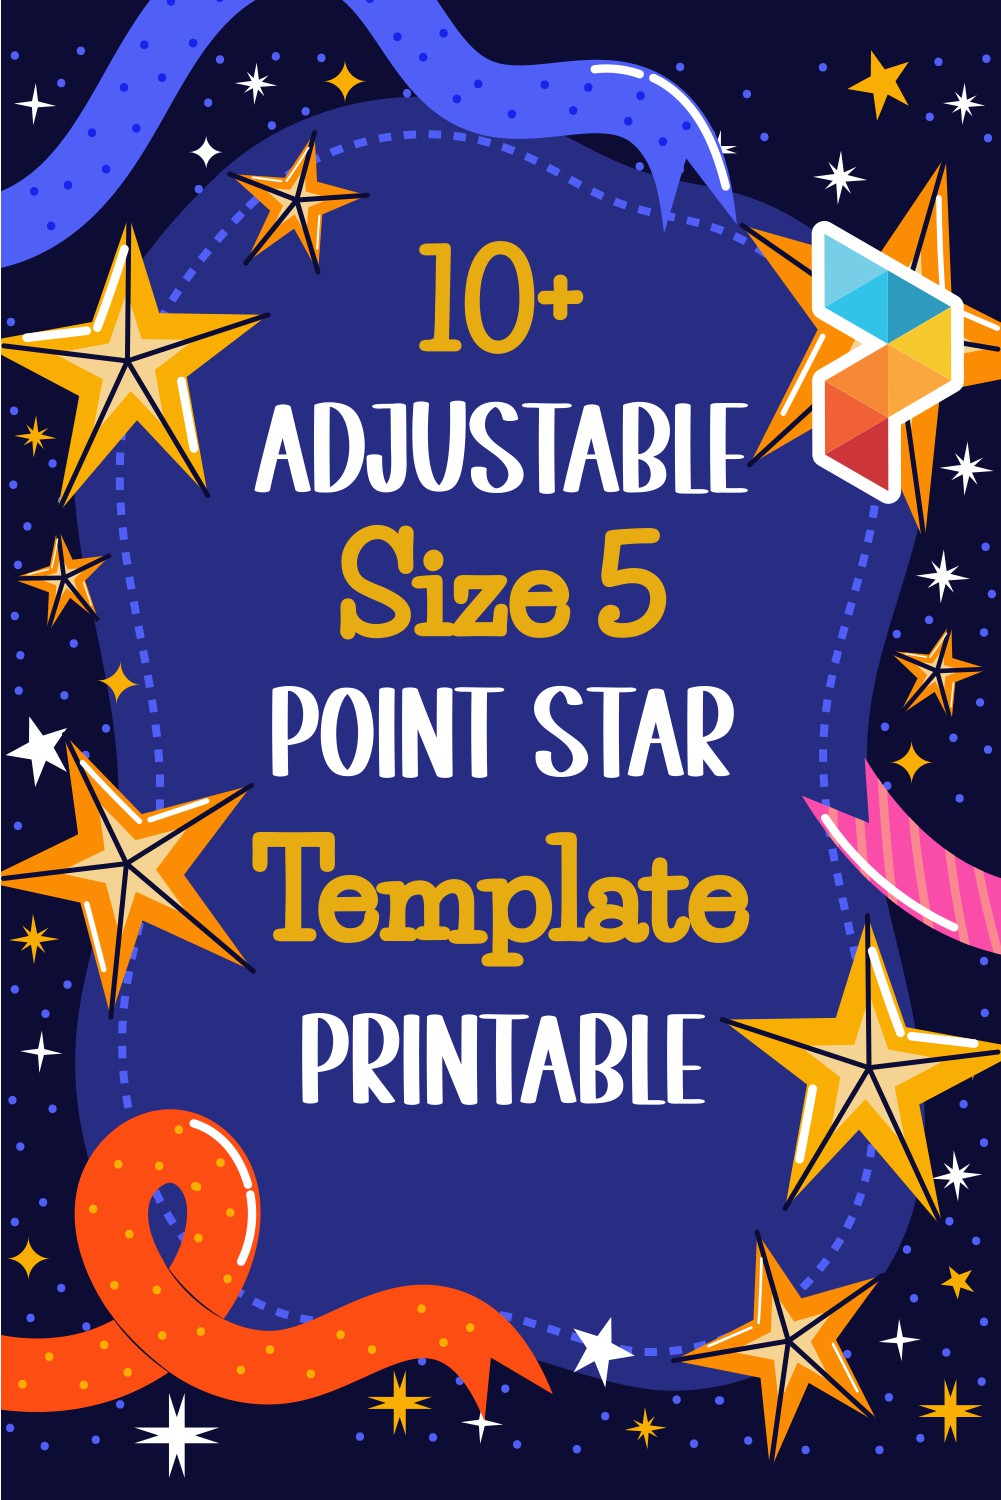 Adjustable Size 5 Point Star Template